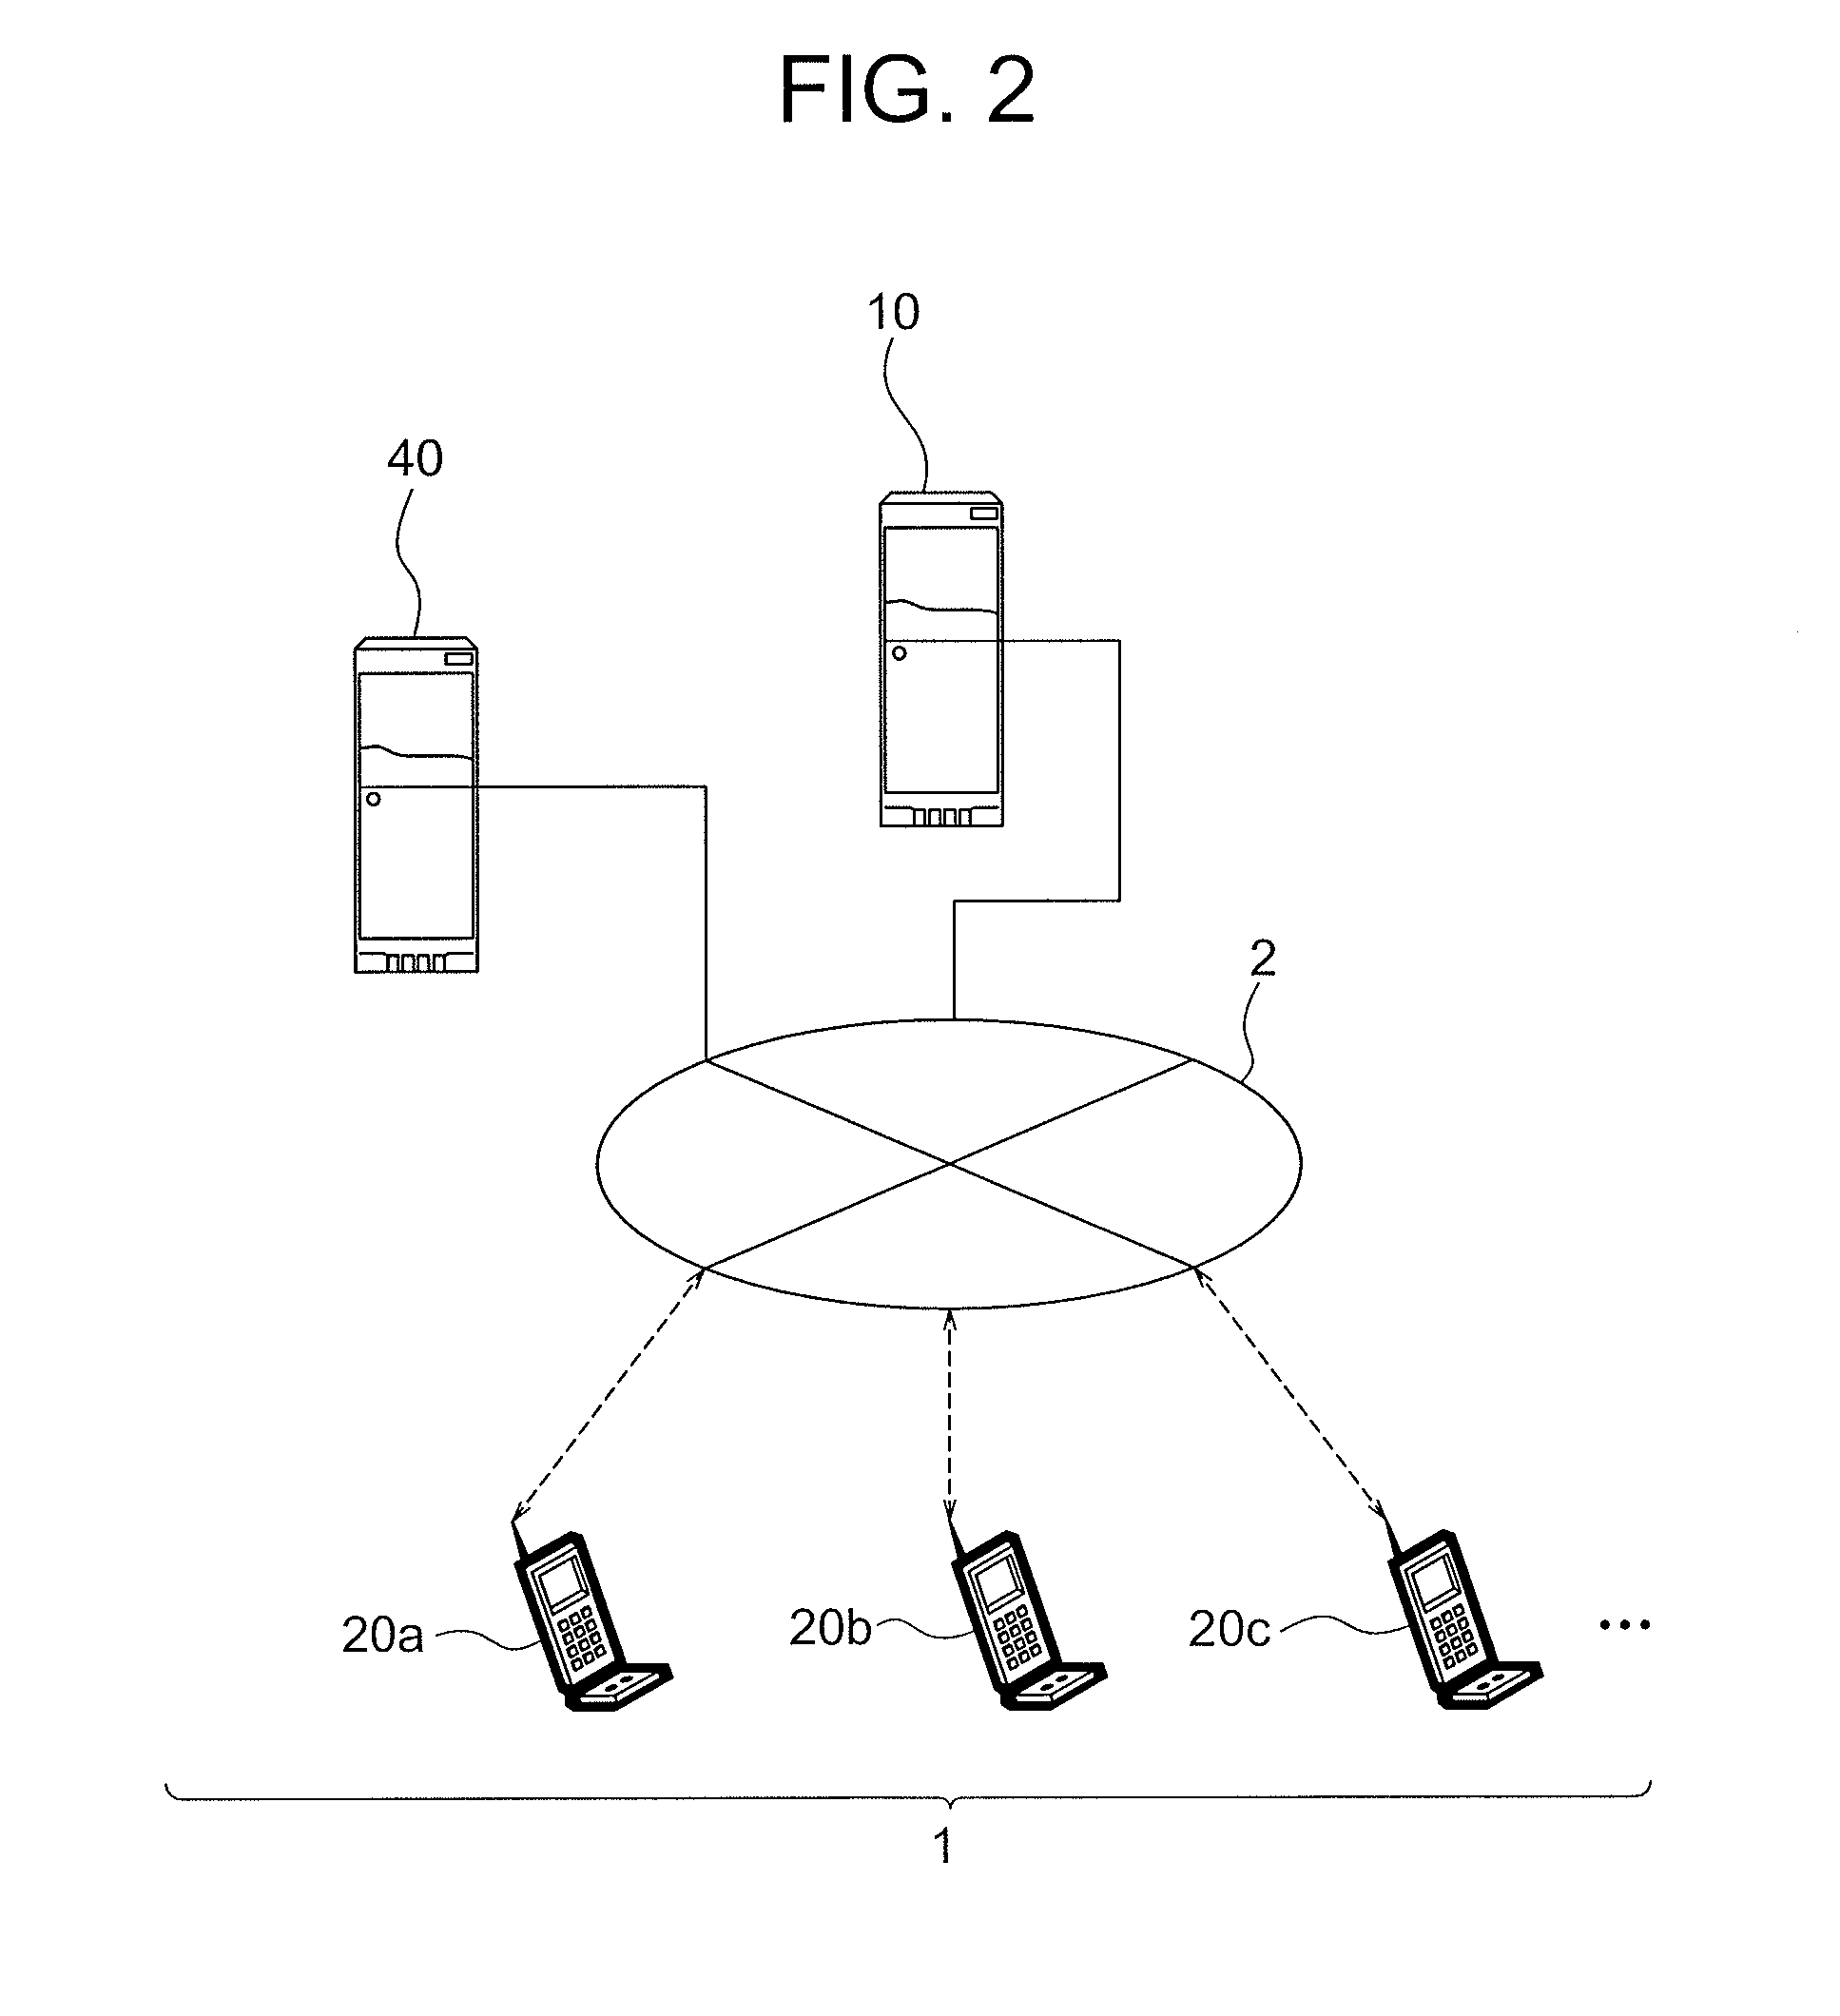 Content sharing system, mobile terminal, protocol switching method and program